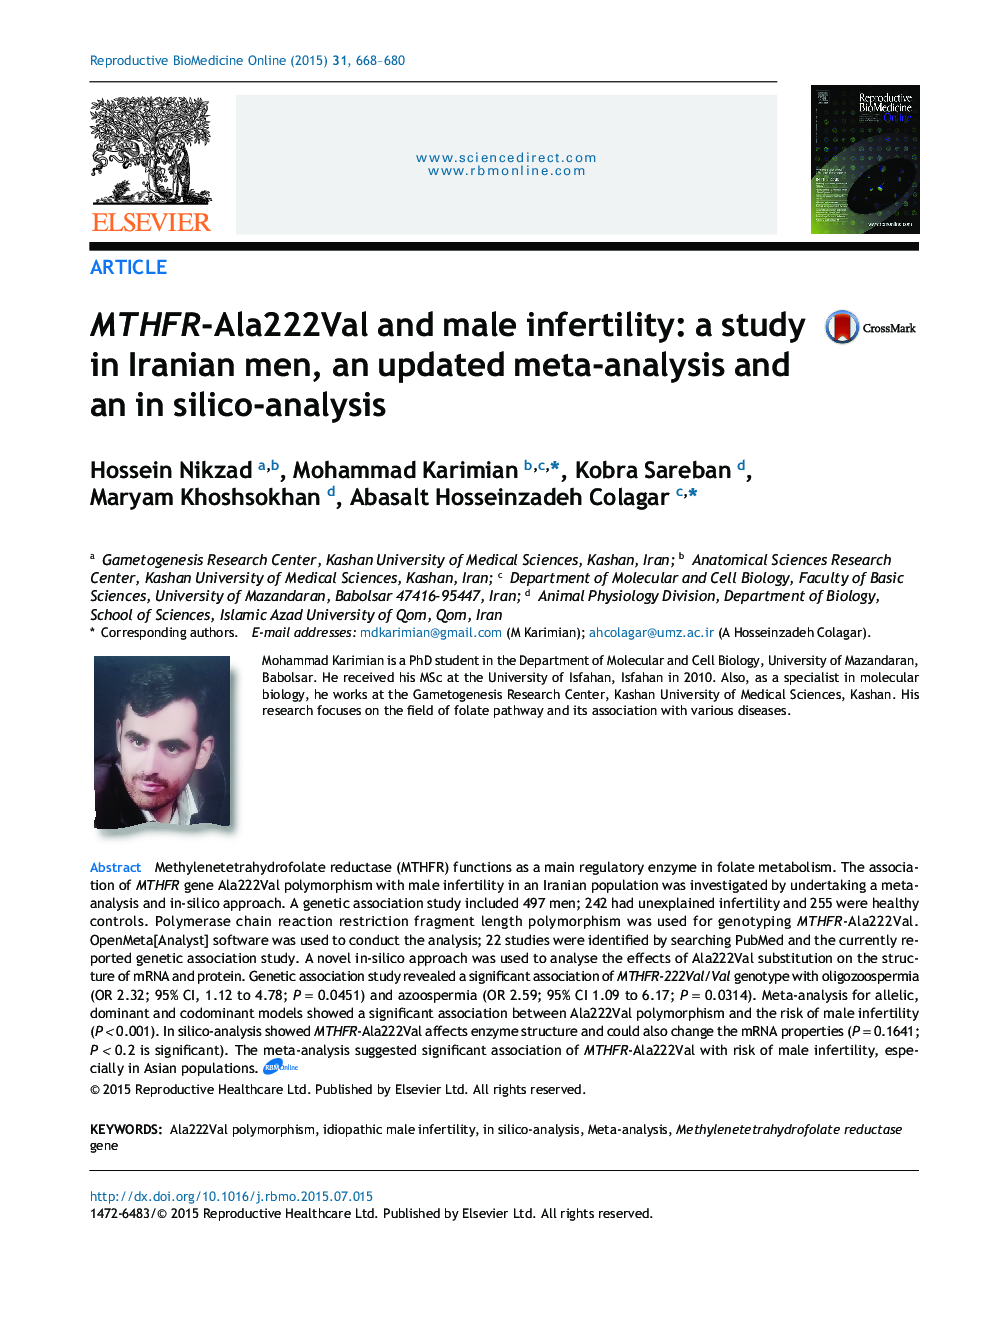 MTHFR-Ala222Val and male infertility: a study in Iranian men, an updated meta-analysis and an in silico-analysis